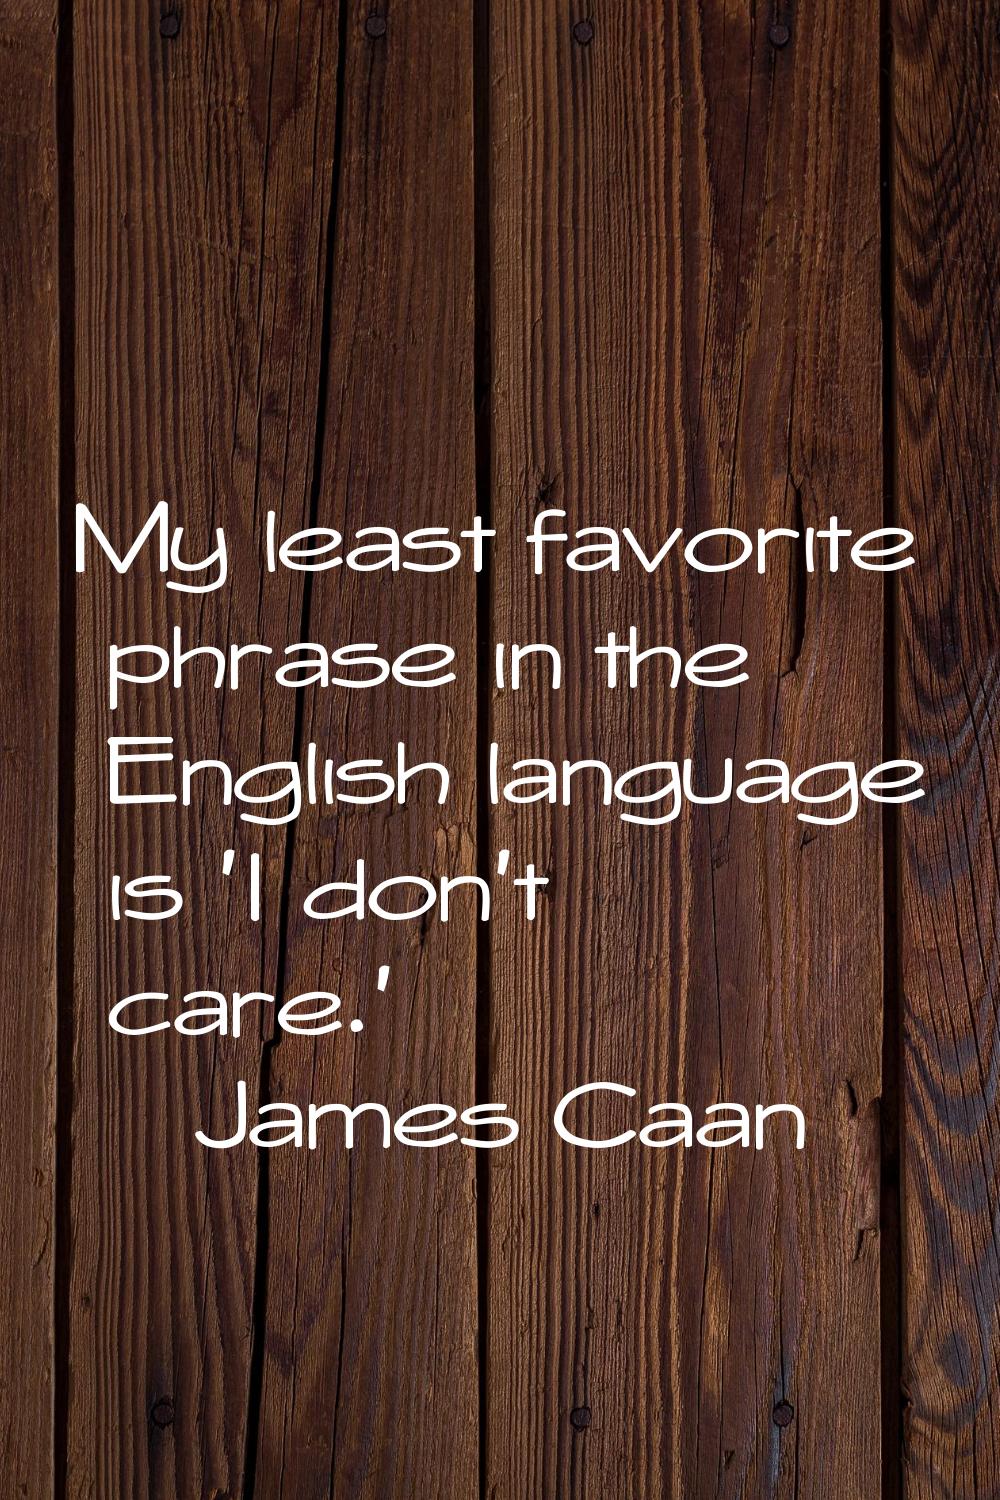 My least favorite phrase in the English language is 'I don't care.'